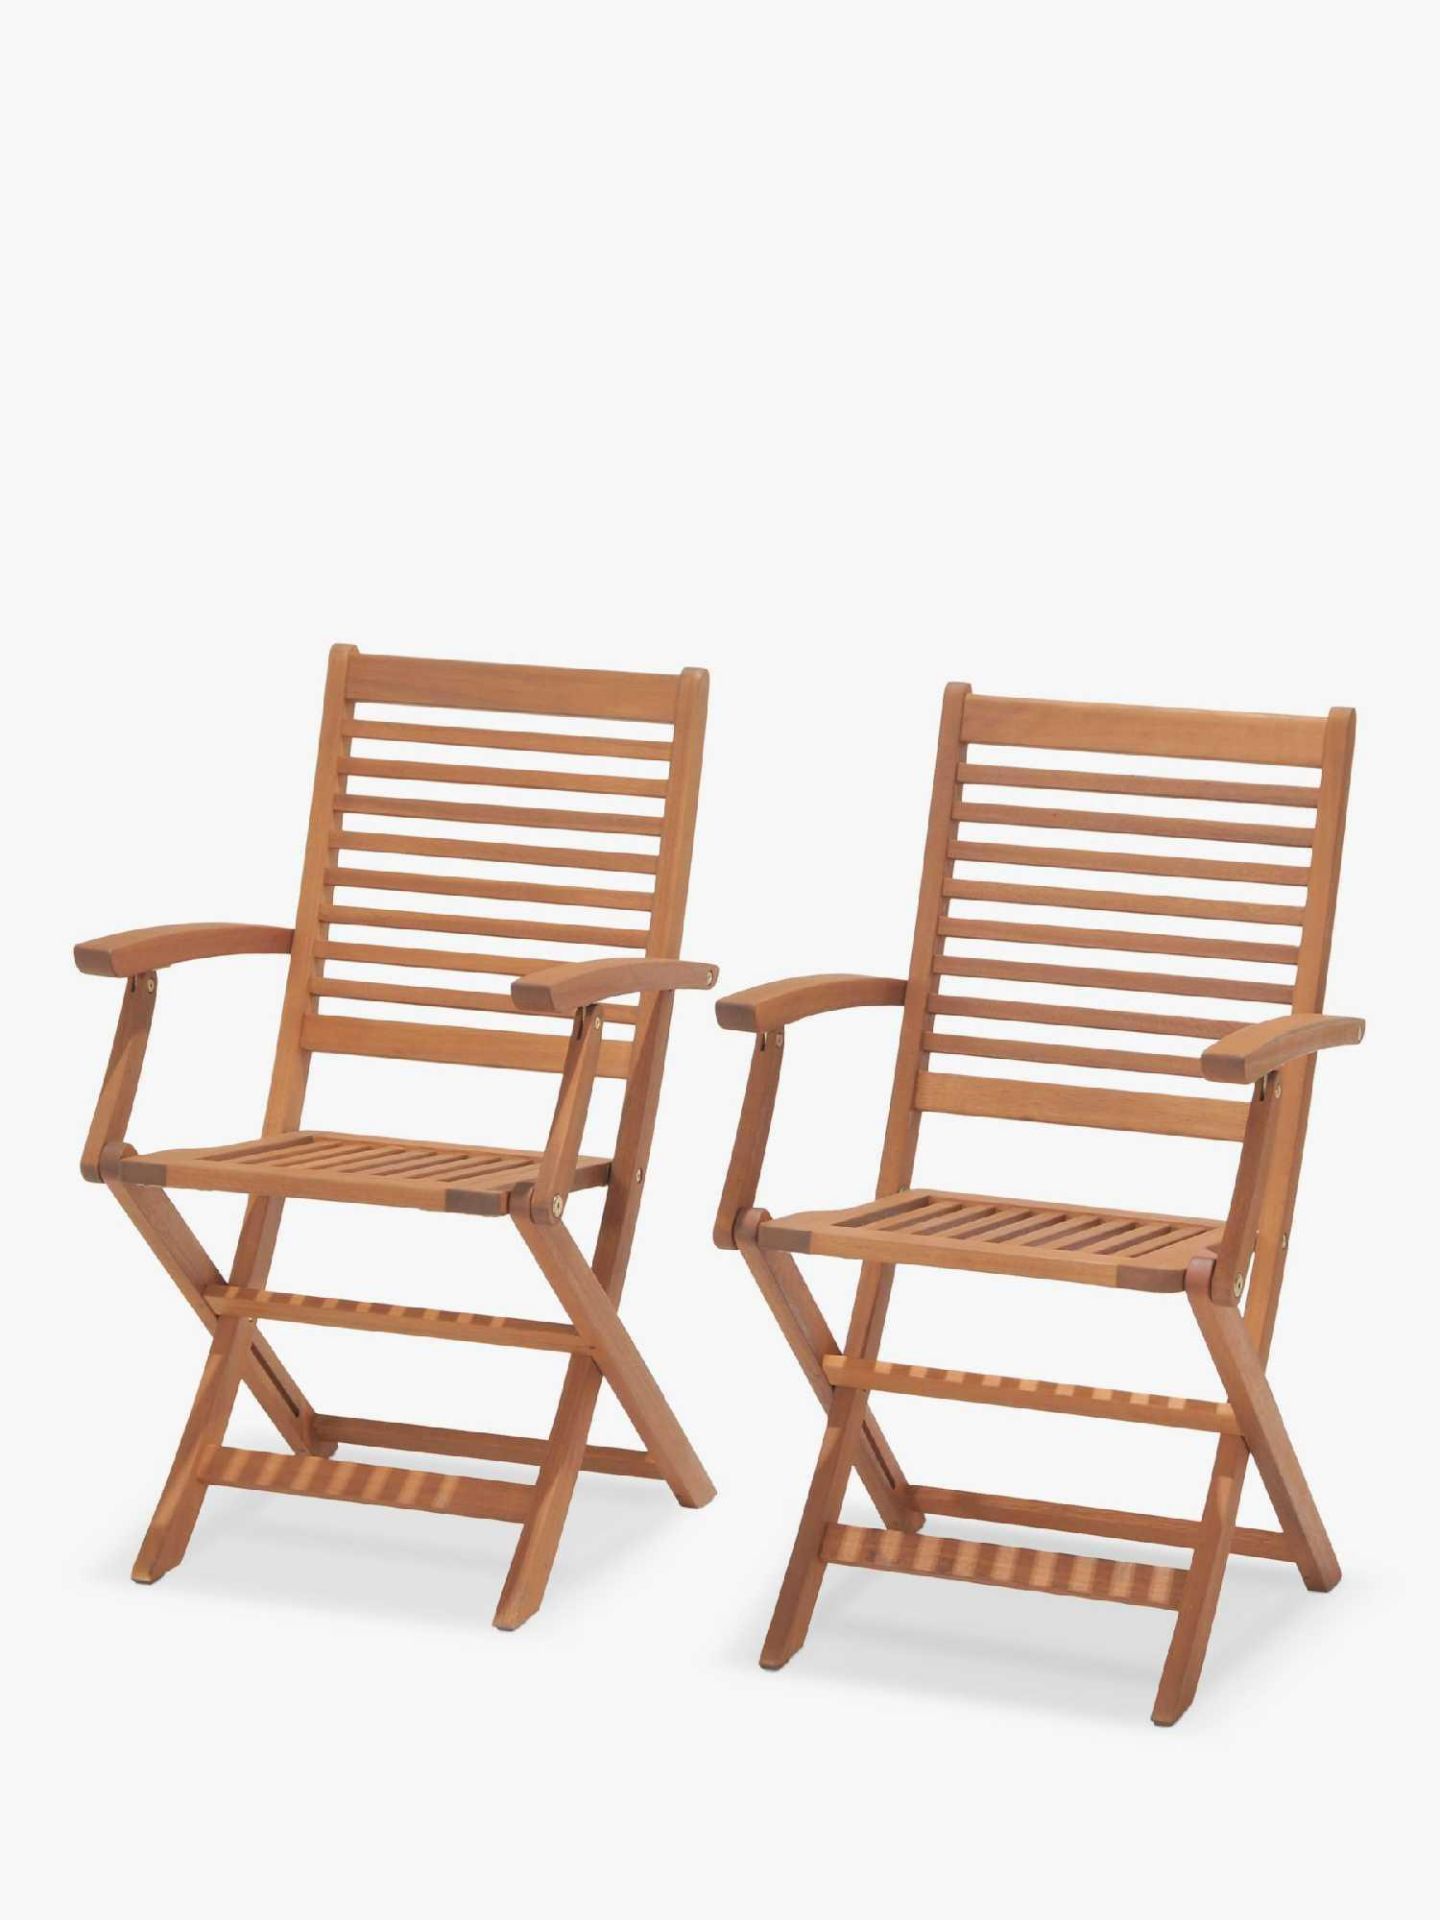 (Jb) RRP £65 Lot To Contain 1 Bagged John Lewis And Partners Wooden Garden Chair (01507804)